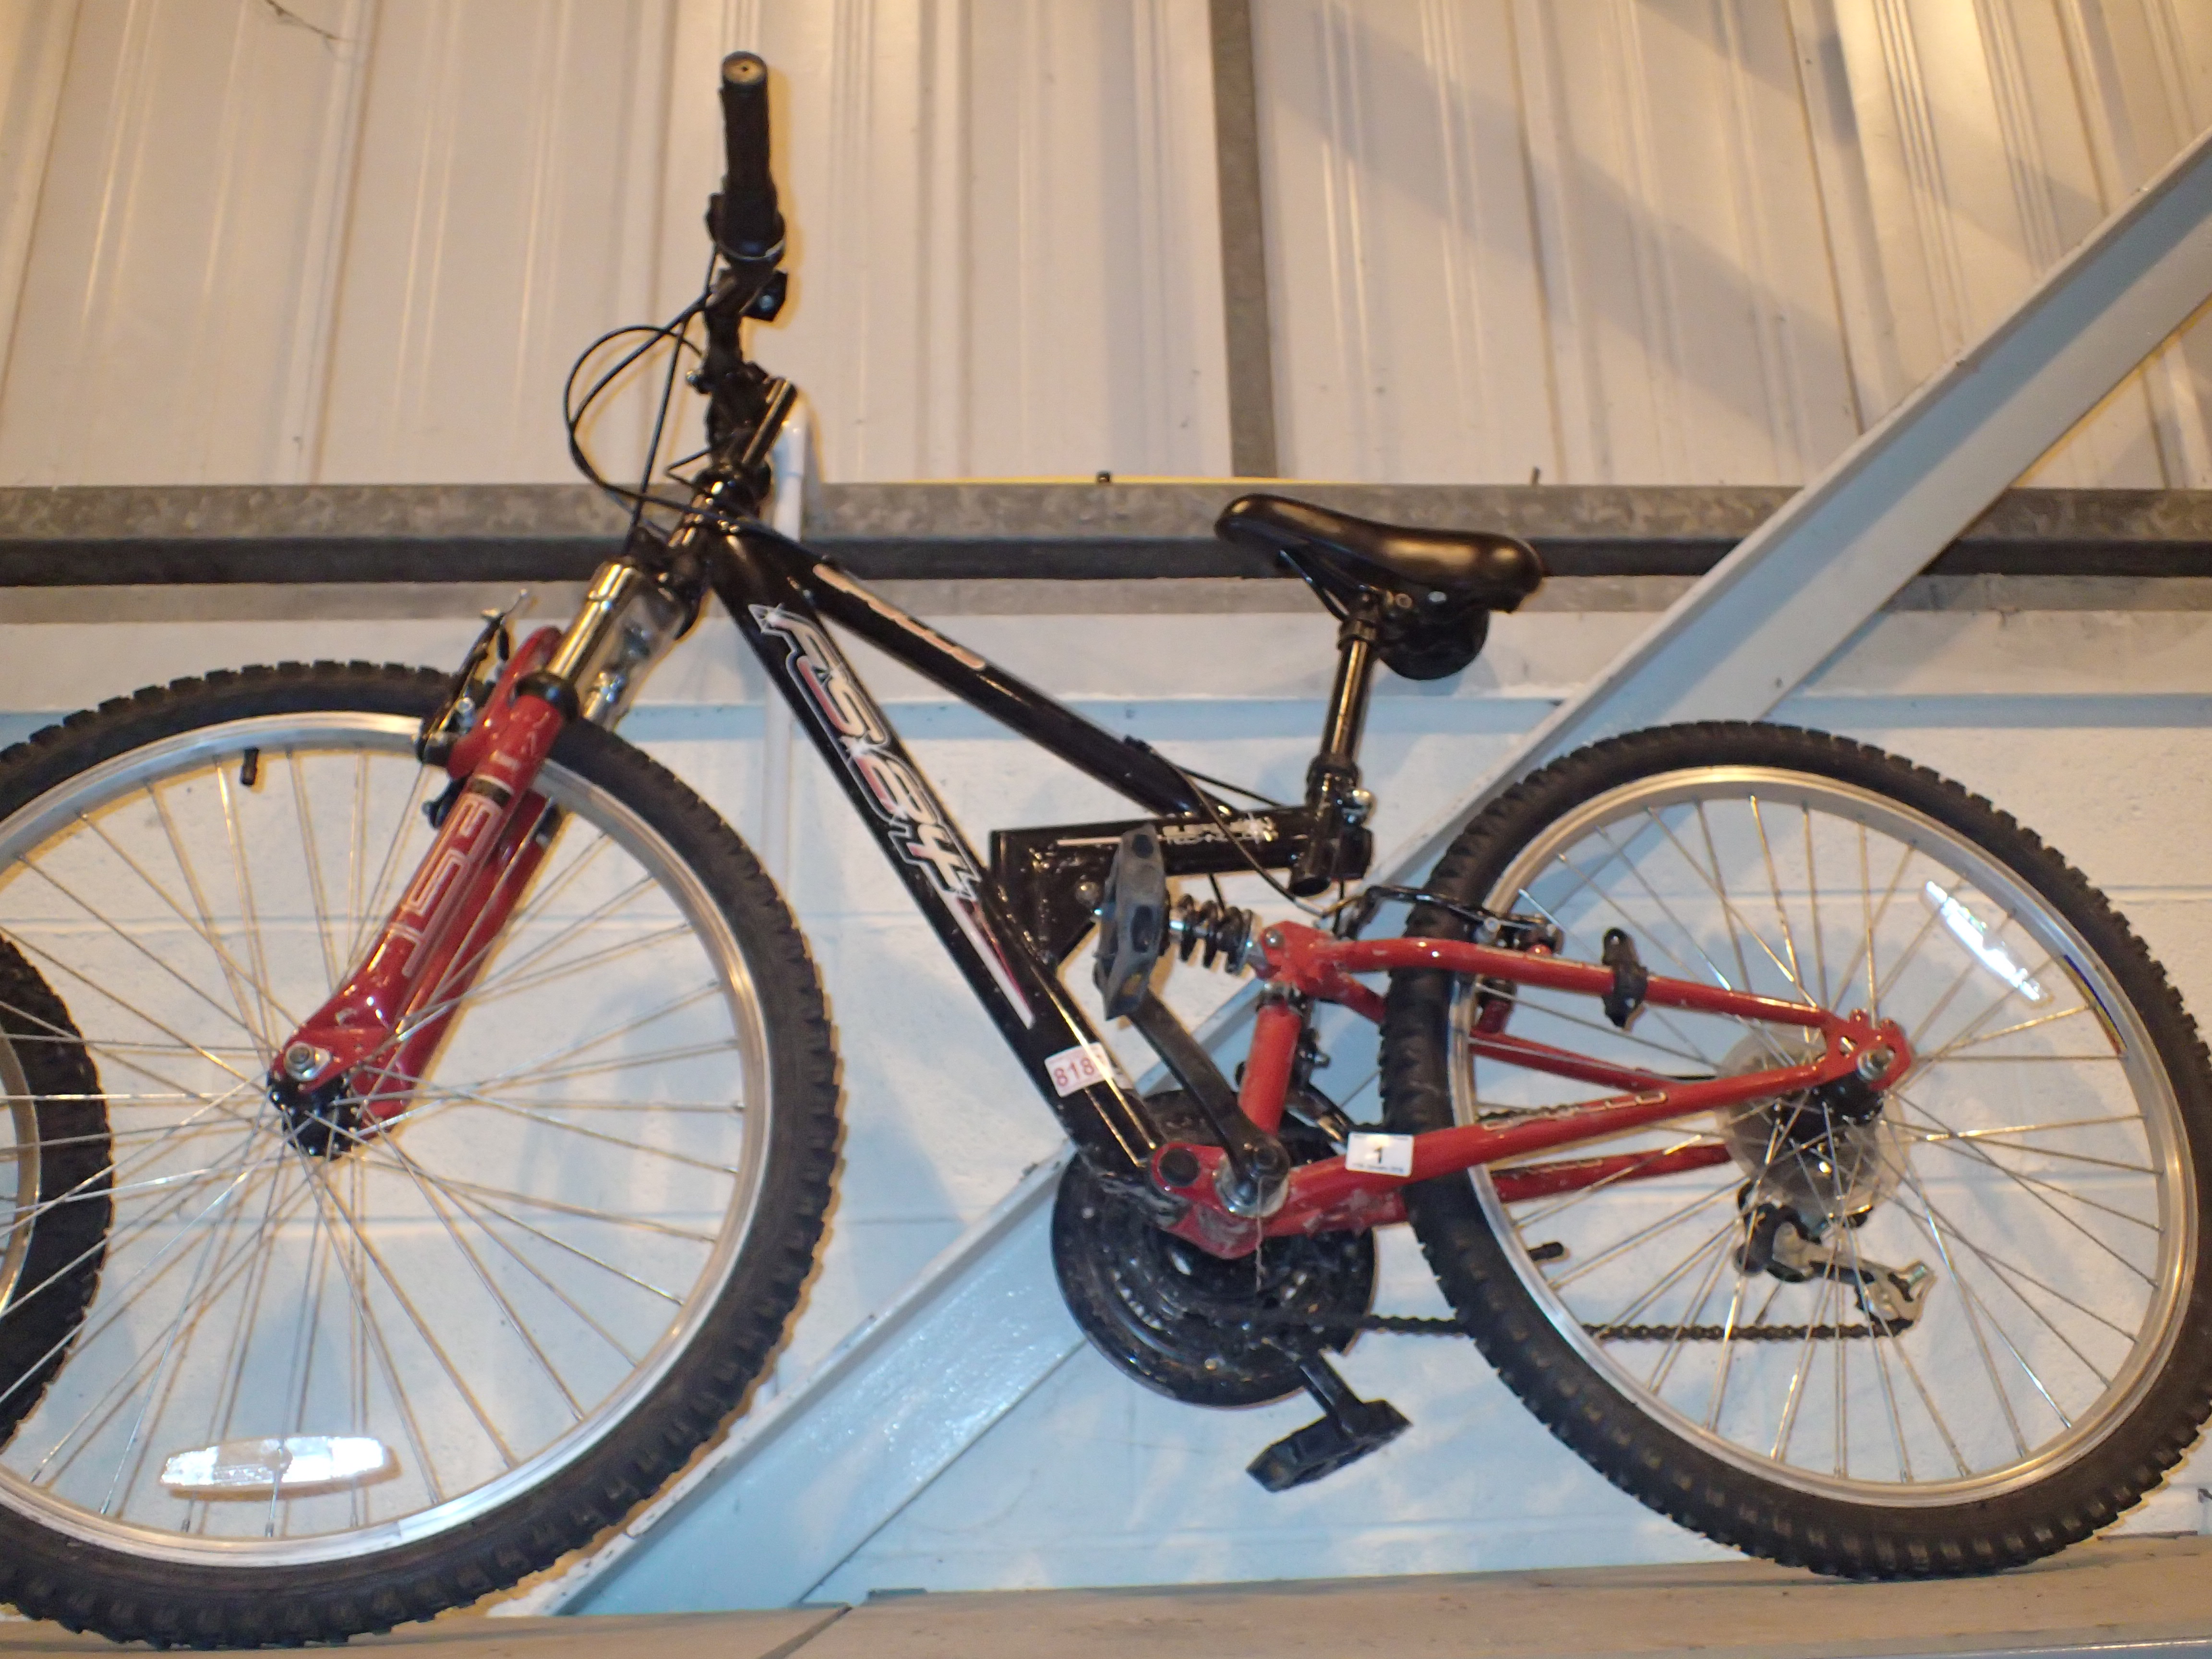 Apollo FS 24 girls mountain bike with front and rear suspension